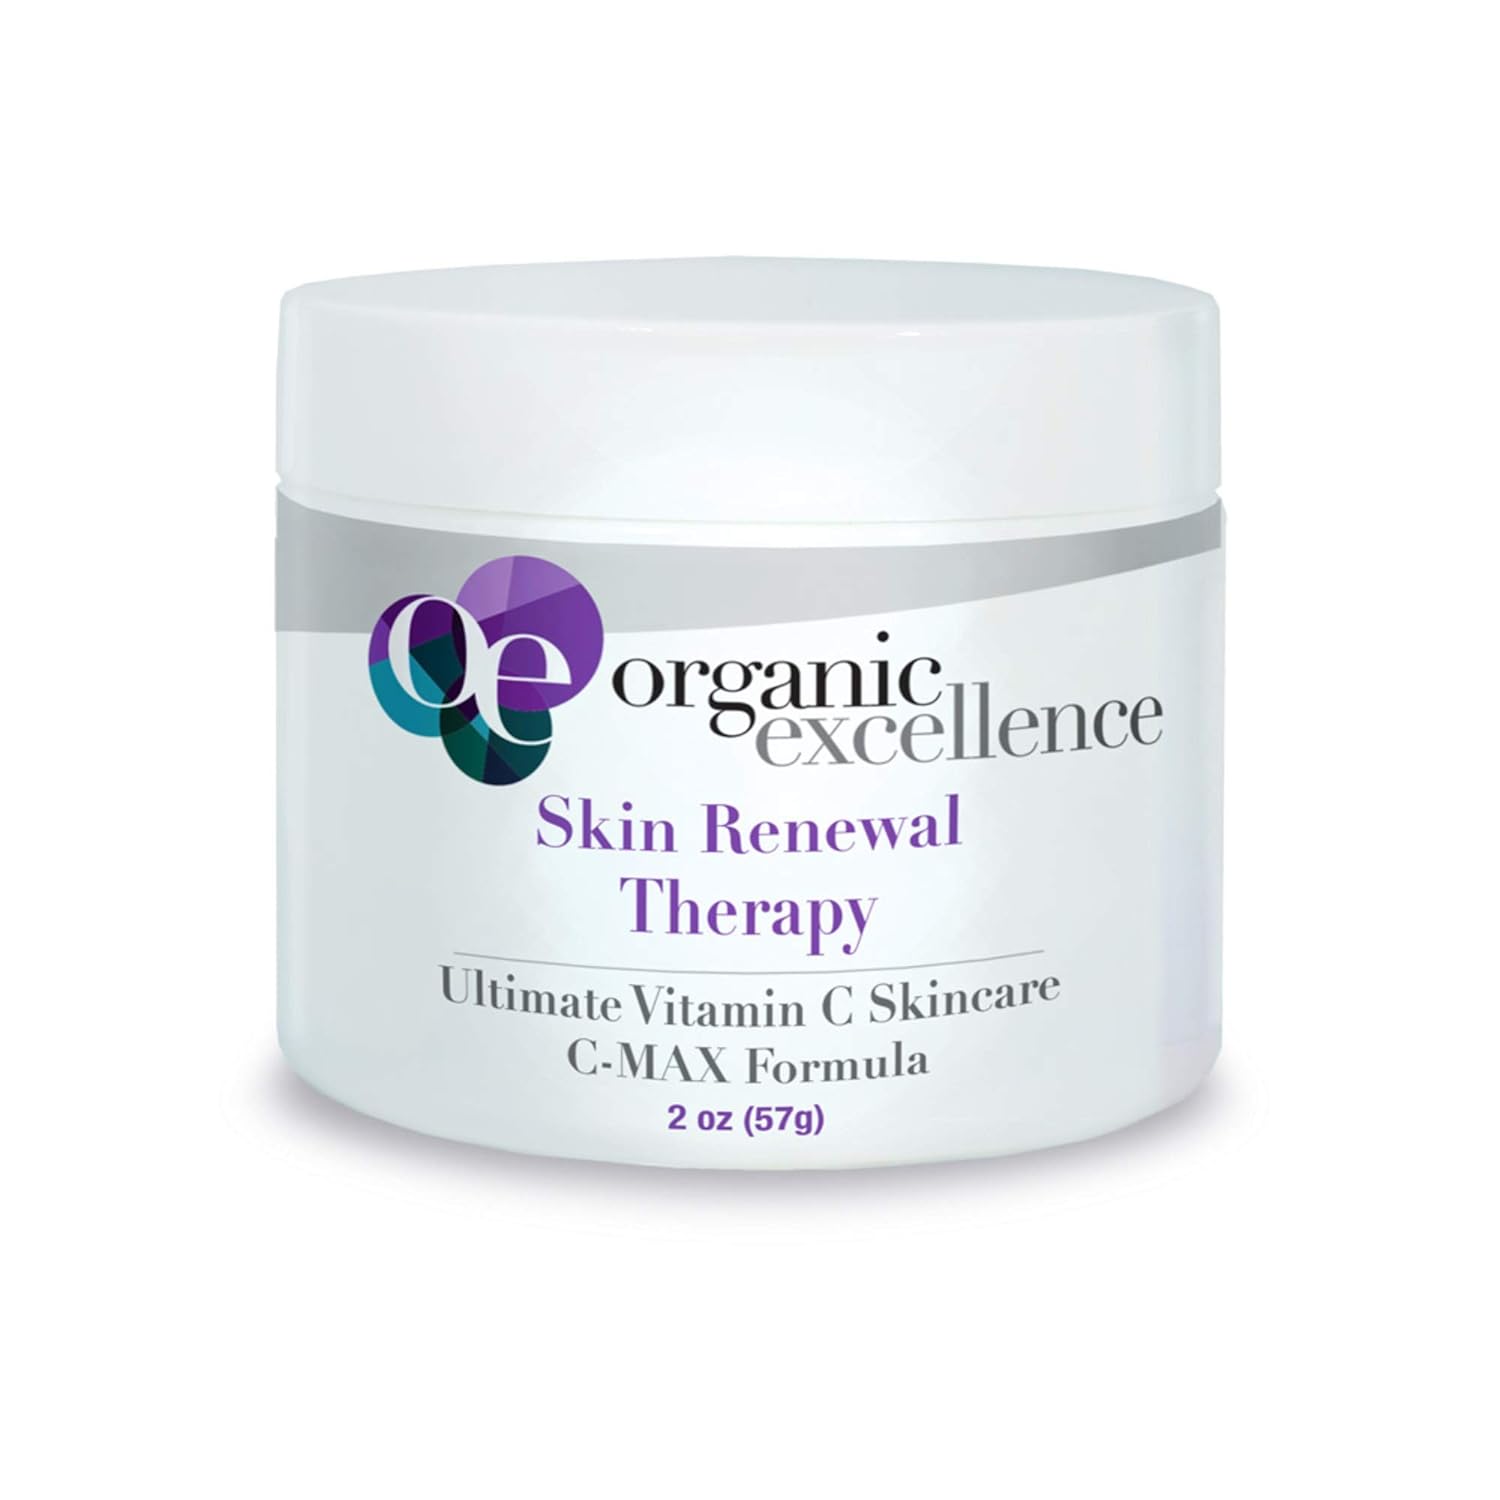 Organic Excellence Skin Renewal Therapy With Vitamin C to Stimulate Collagen Production and Increase Skin Cell Renewal, Face  Neck Moisturizing Cream For Dry or Mature Skin